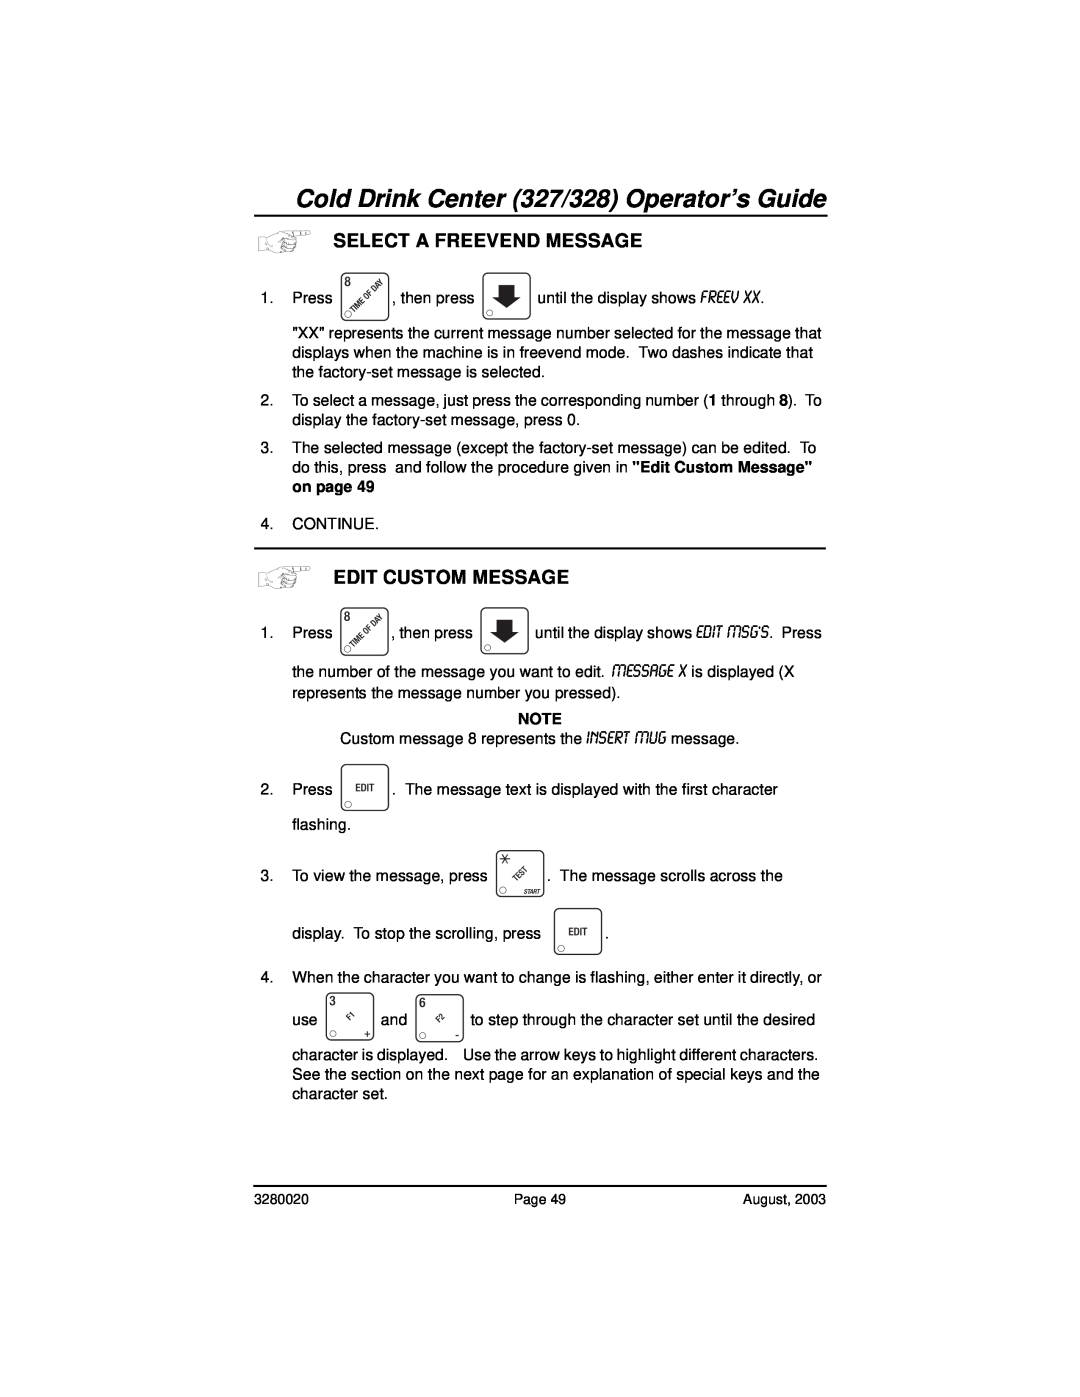 Everpure 325 manual Cold Drink Center 327/328 Operator’s Guide, Select A Freevend Message 